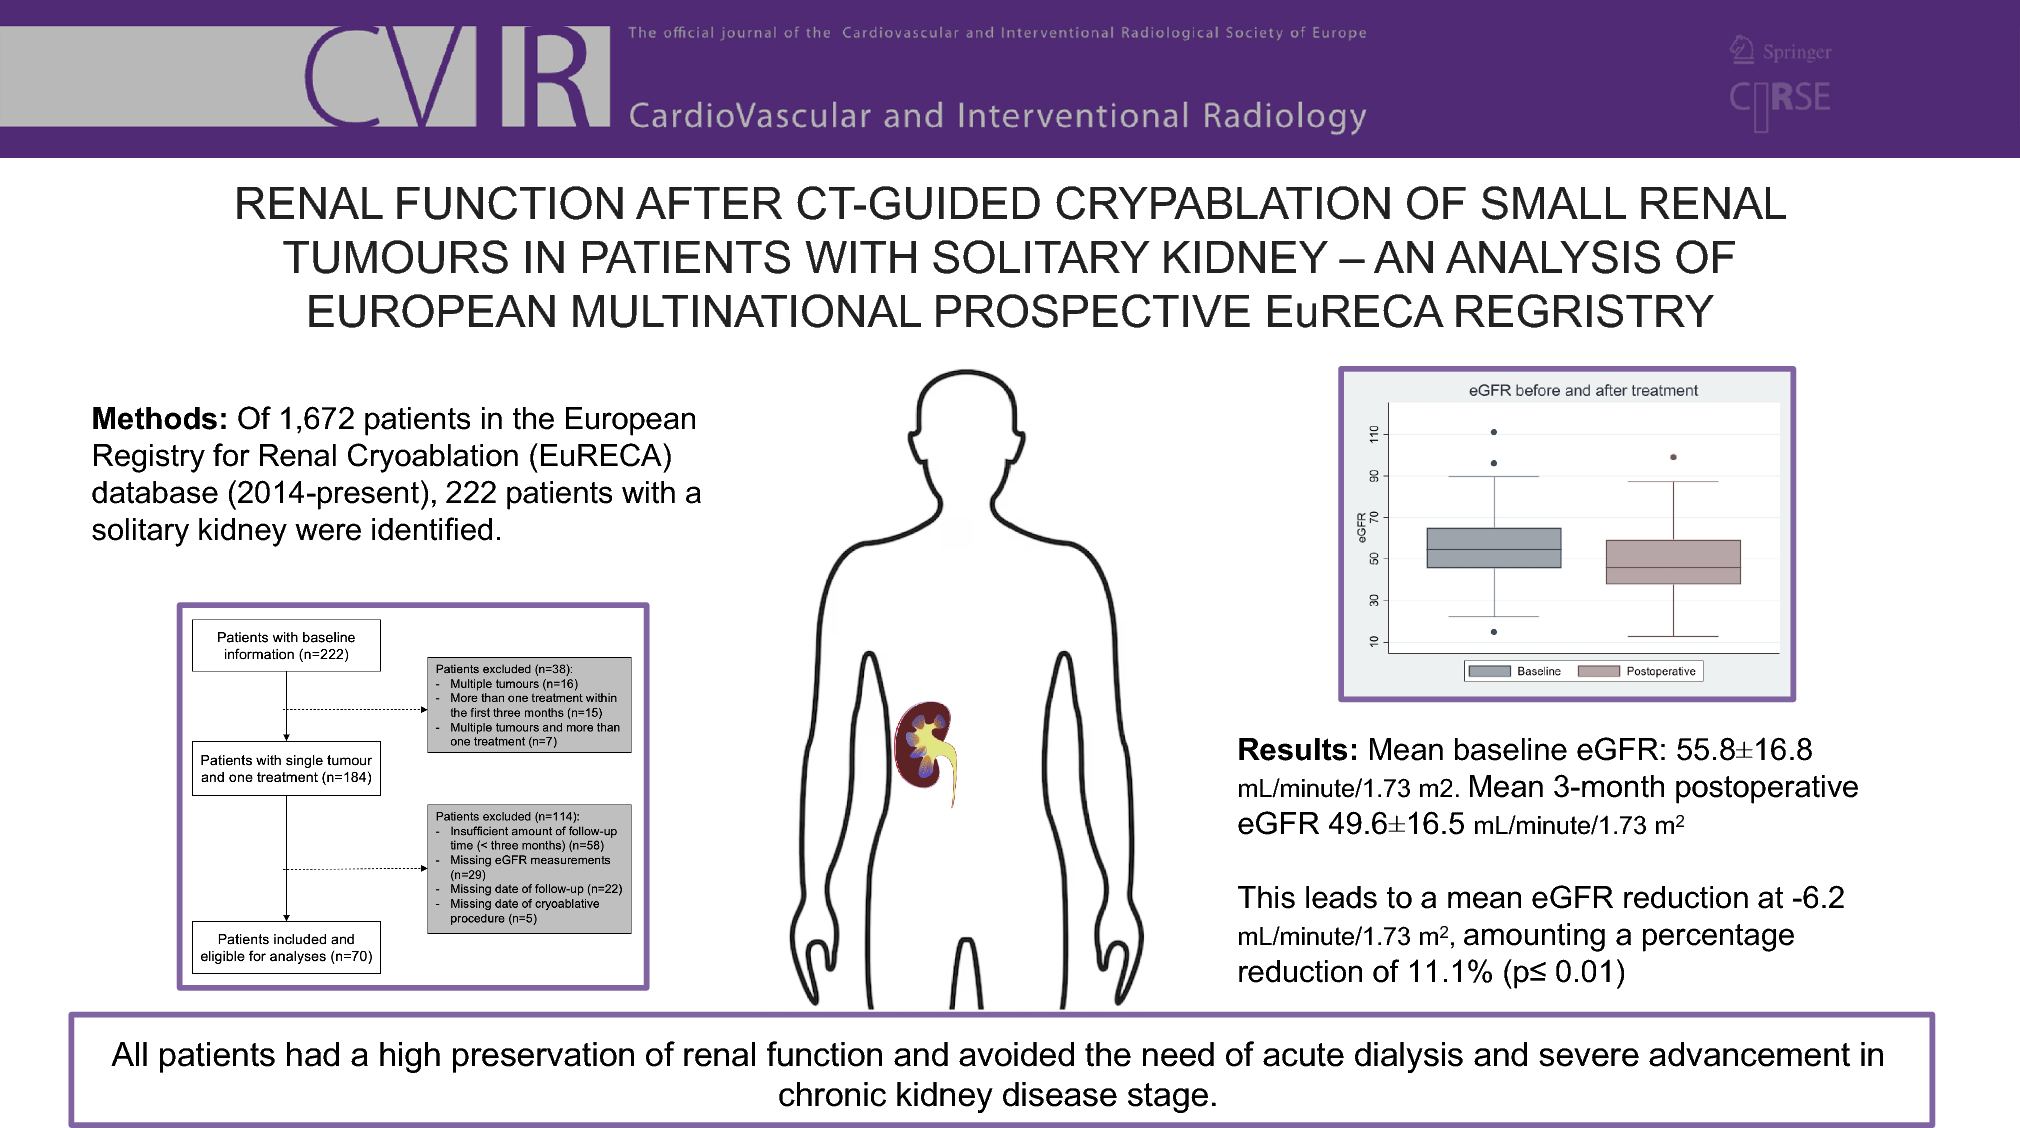 Renal Function After CT-Guided Cryoablation of Small Renal Tumours in Patients with Solitary Kidney: An Analysis of European Multinational Prospective EuRECA Registry